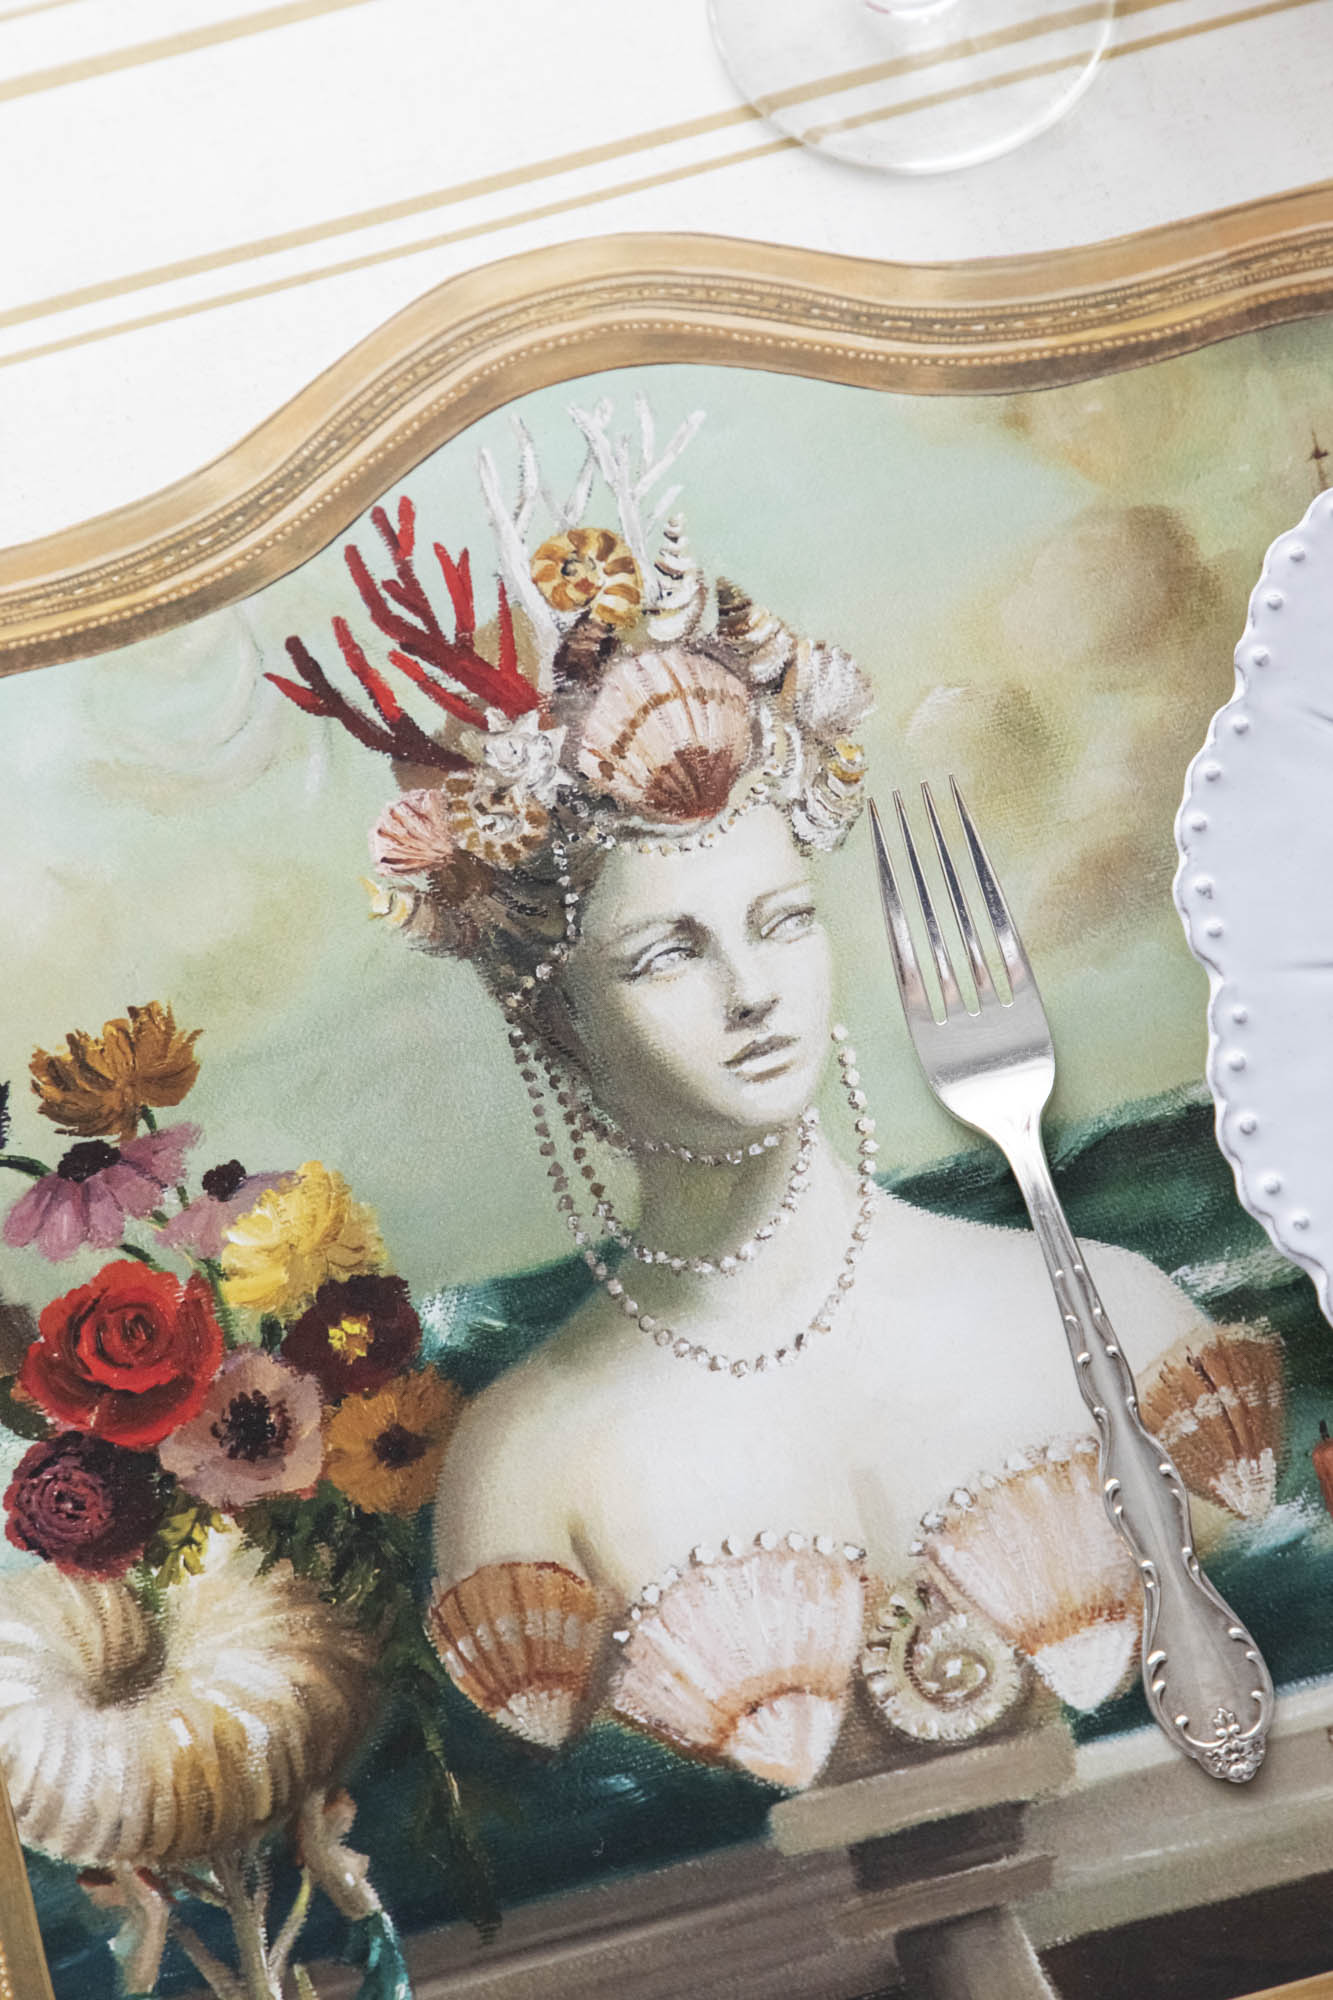 Close-up of the Die-cut Goddess of the Sea Placemat under an elegant place setting, showing the artwork in detail.